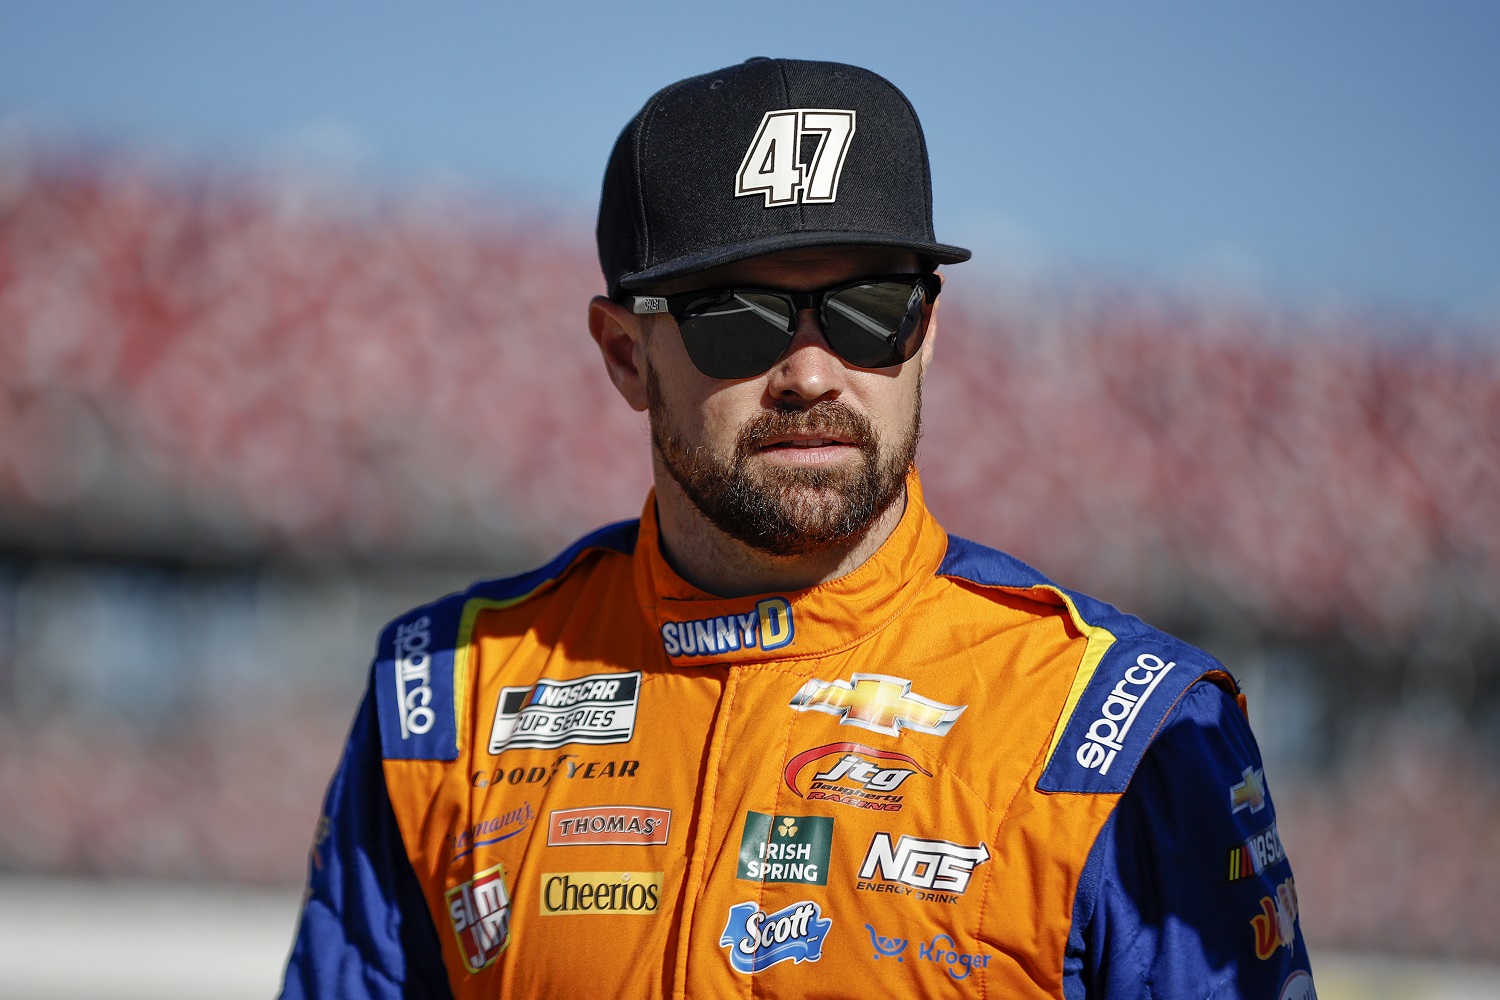 Ricky Stenhouse Jr., driver of the No. 47 Chevrolet, walks the grid during qualifying for the NASCAR Cup Series YellaWood 500 at Talladega Superspeedway on Oct. 1, 2022.